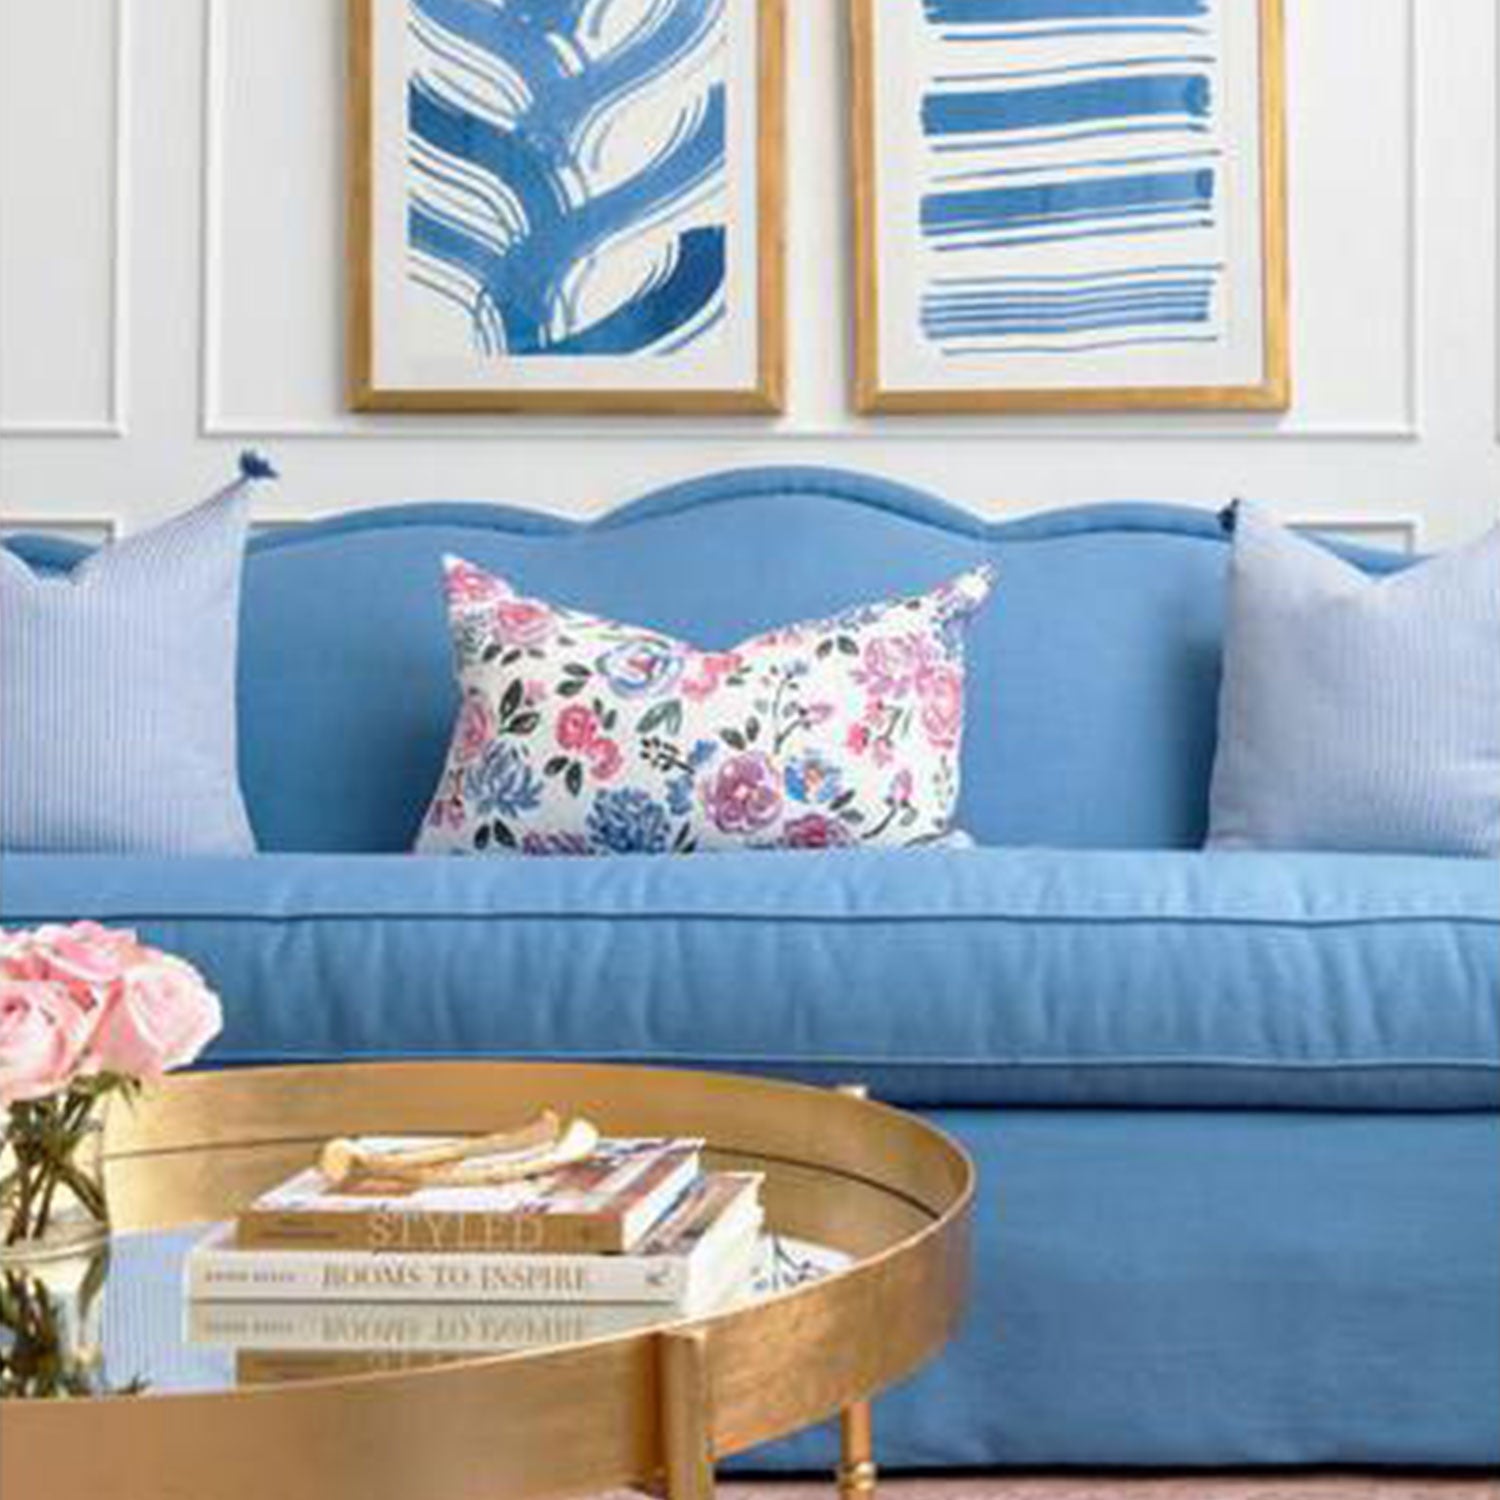 Kennedy Blue Sofa with Curved Back in Living Room